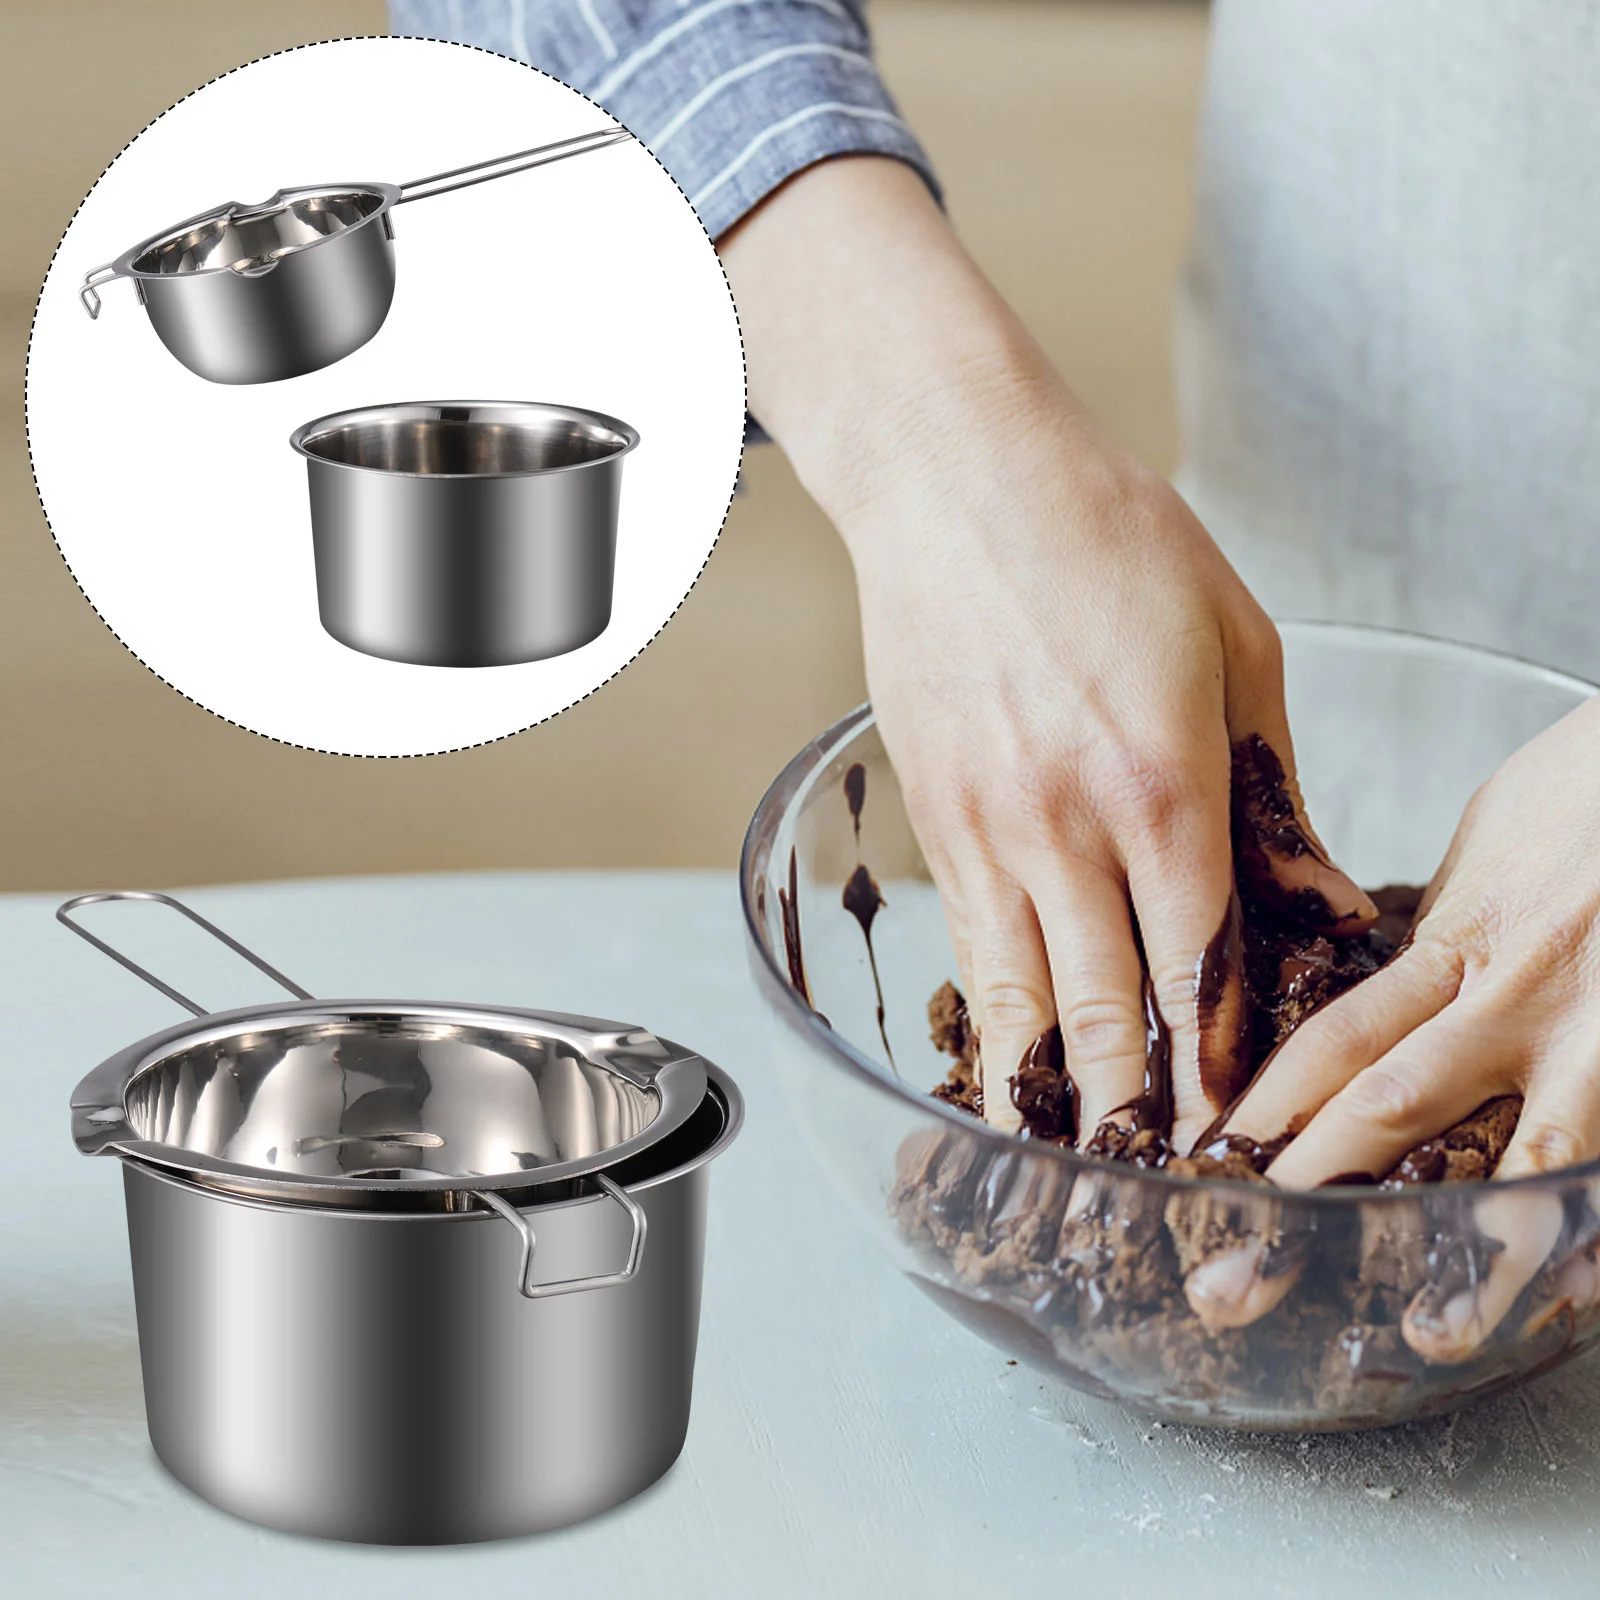 

Pot Melting Boiler Double Chocolate Wax Candy Making Stainless Steel Pan Cheese Butter Soap Warmer Pouring Melt Bowl Fondue Set